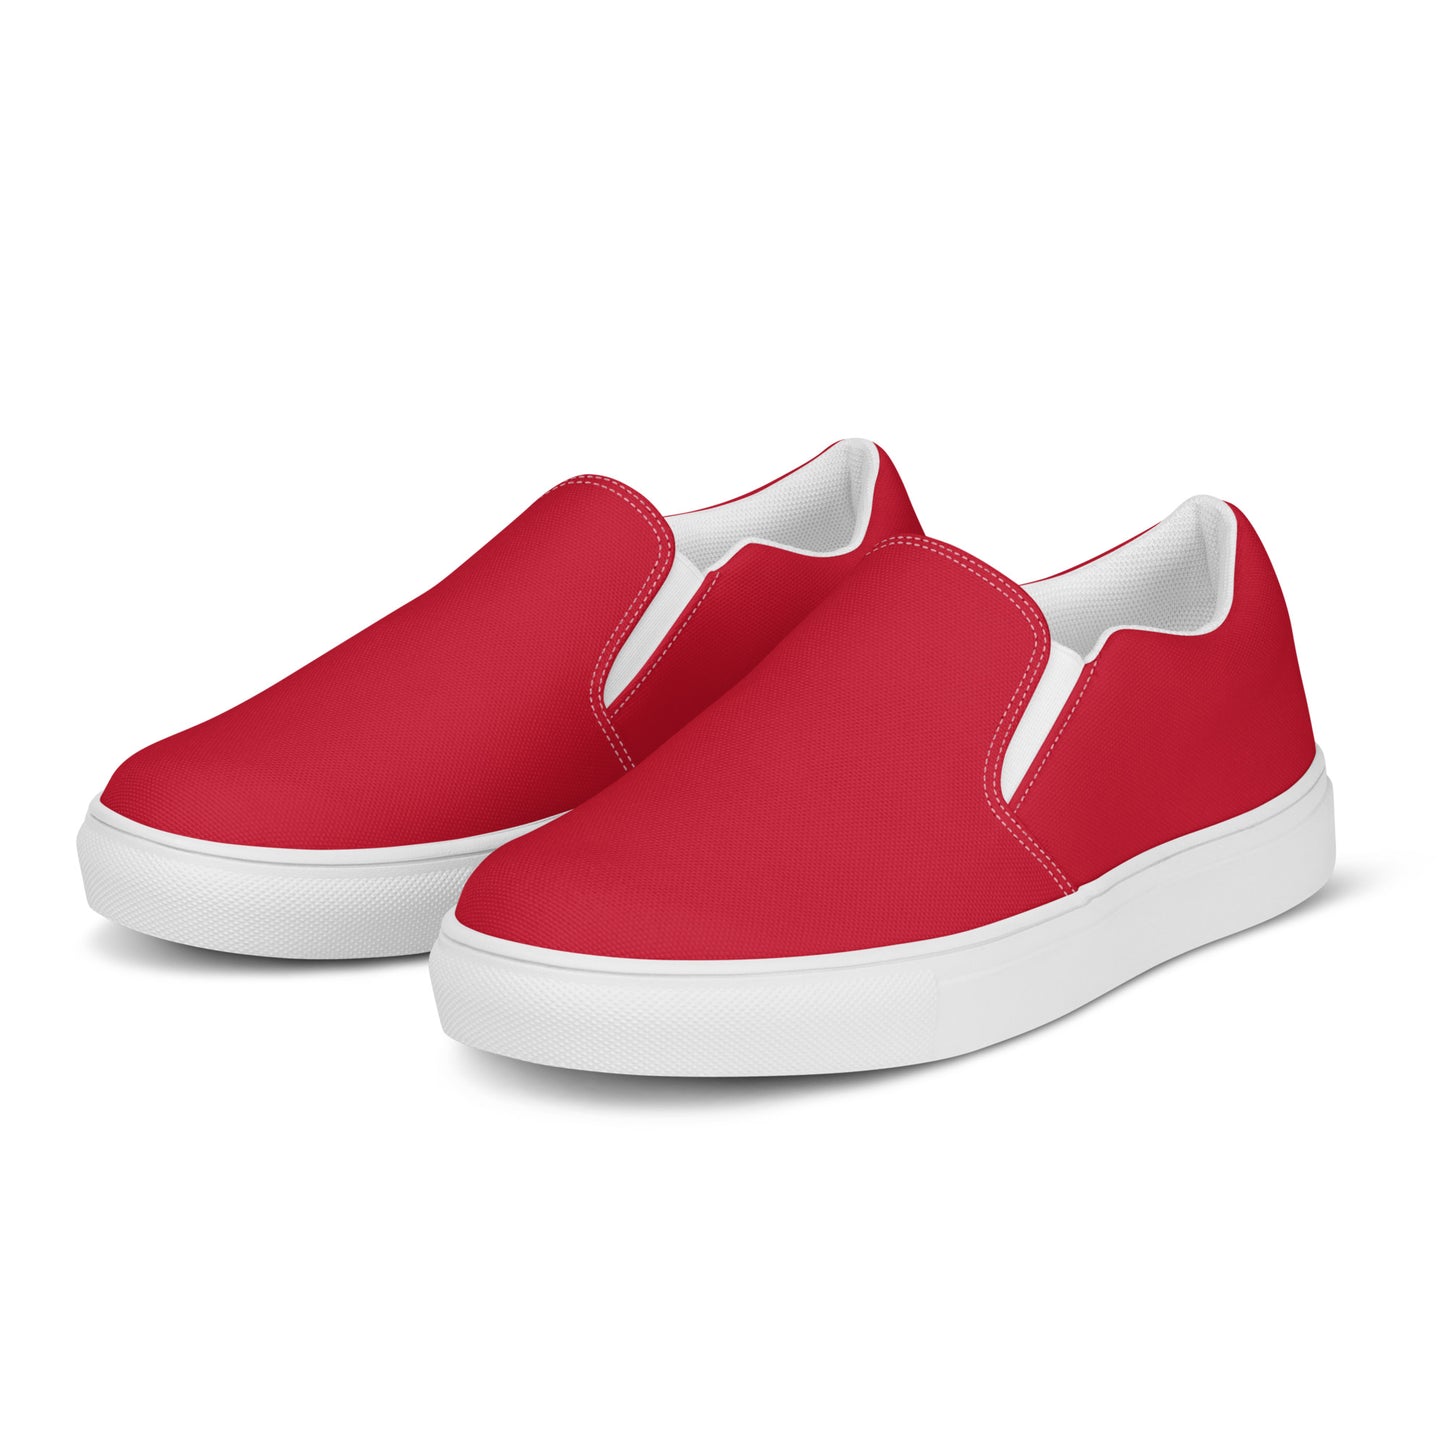 Women’s Red Slip-on Canvas Shoes